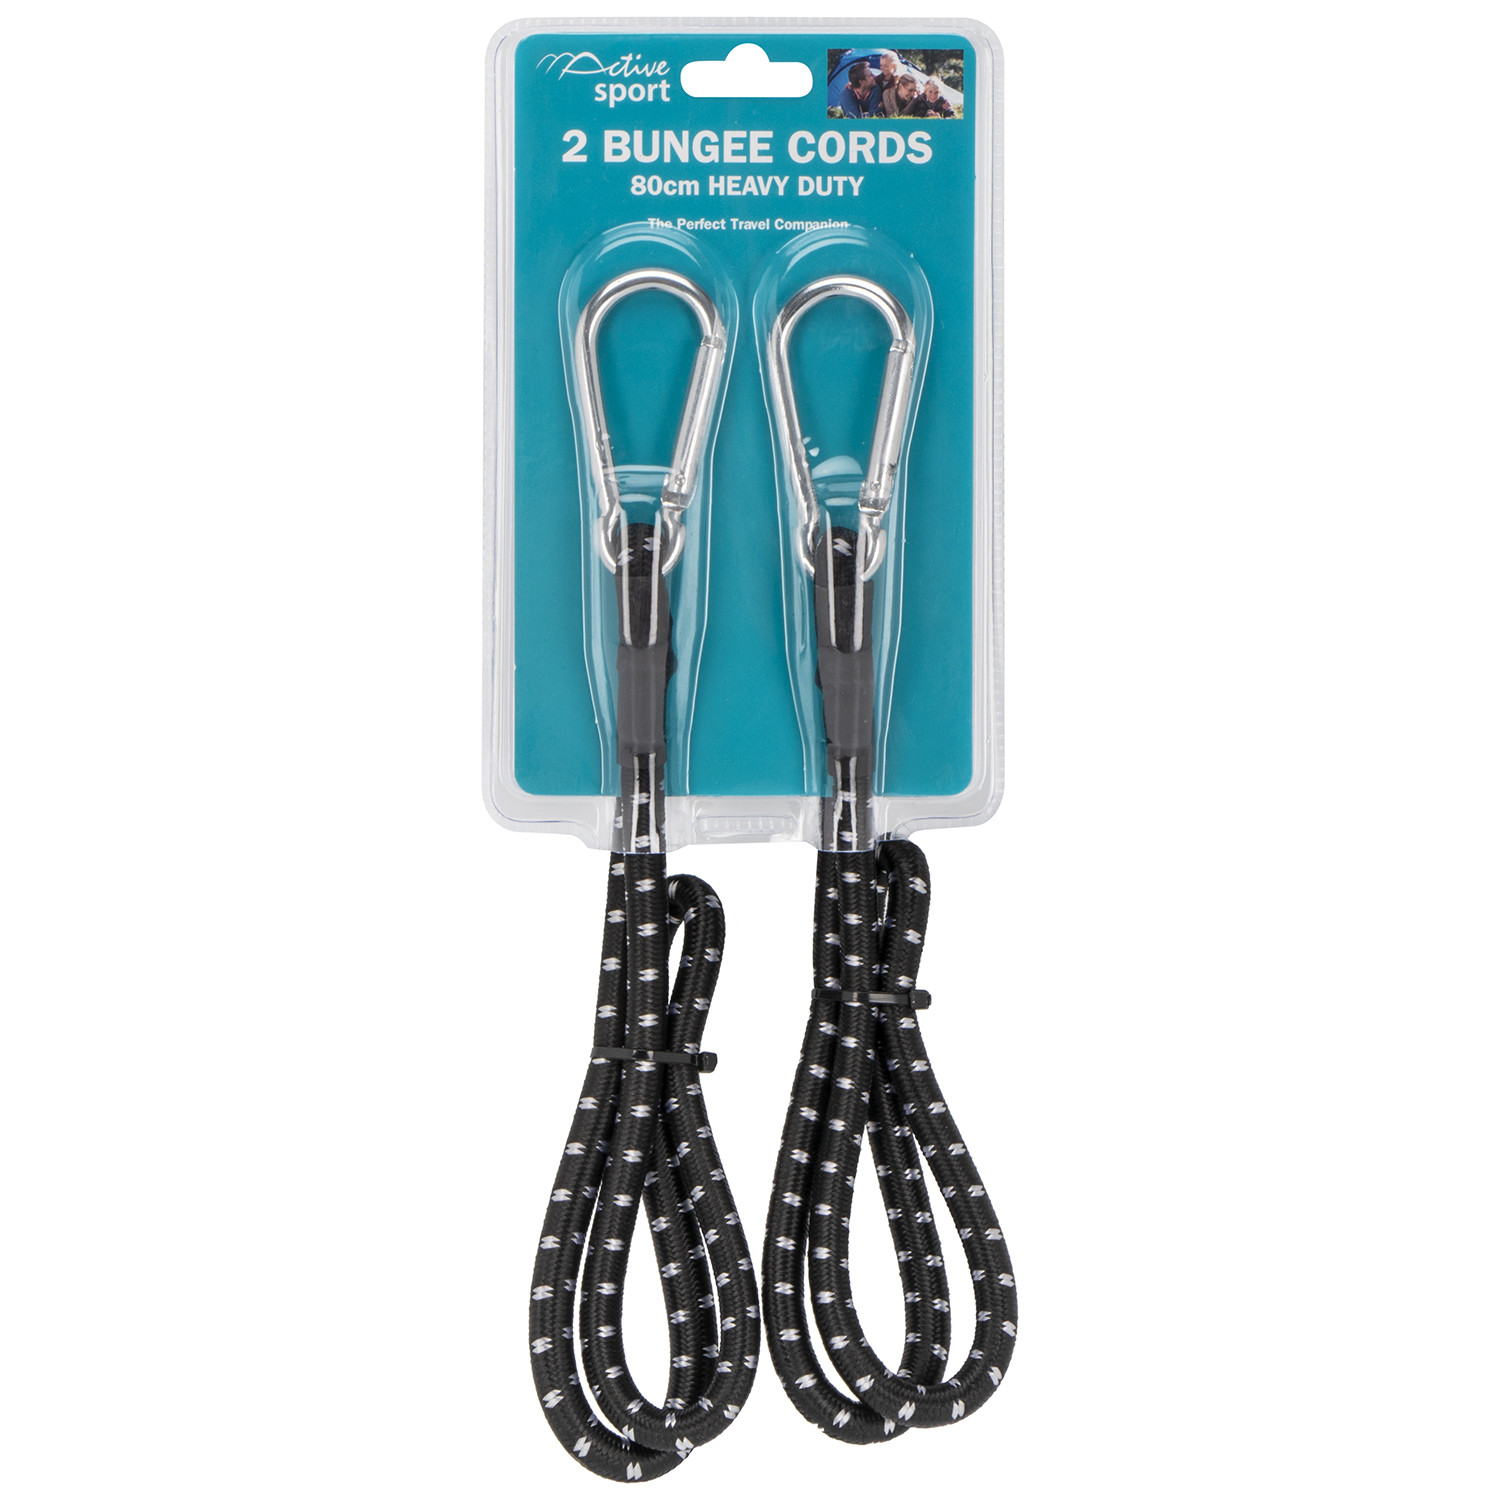 Active Sport Heavy Duty Bungee Cords 2 Pack Image